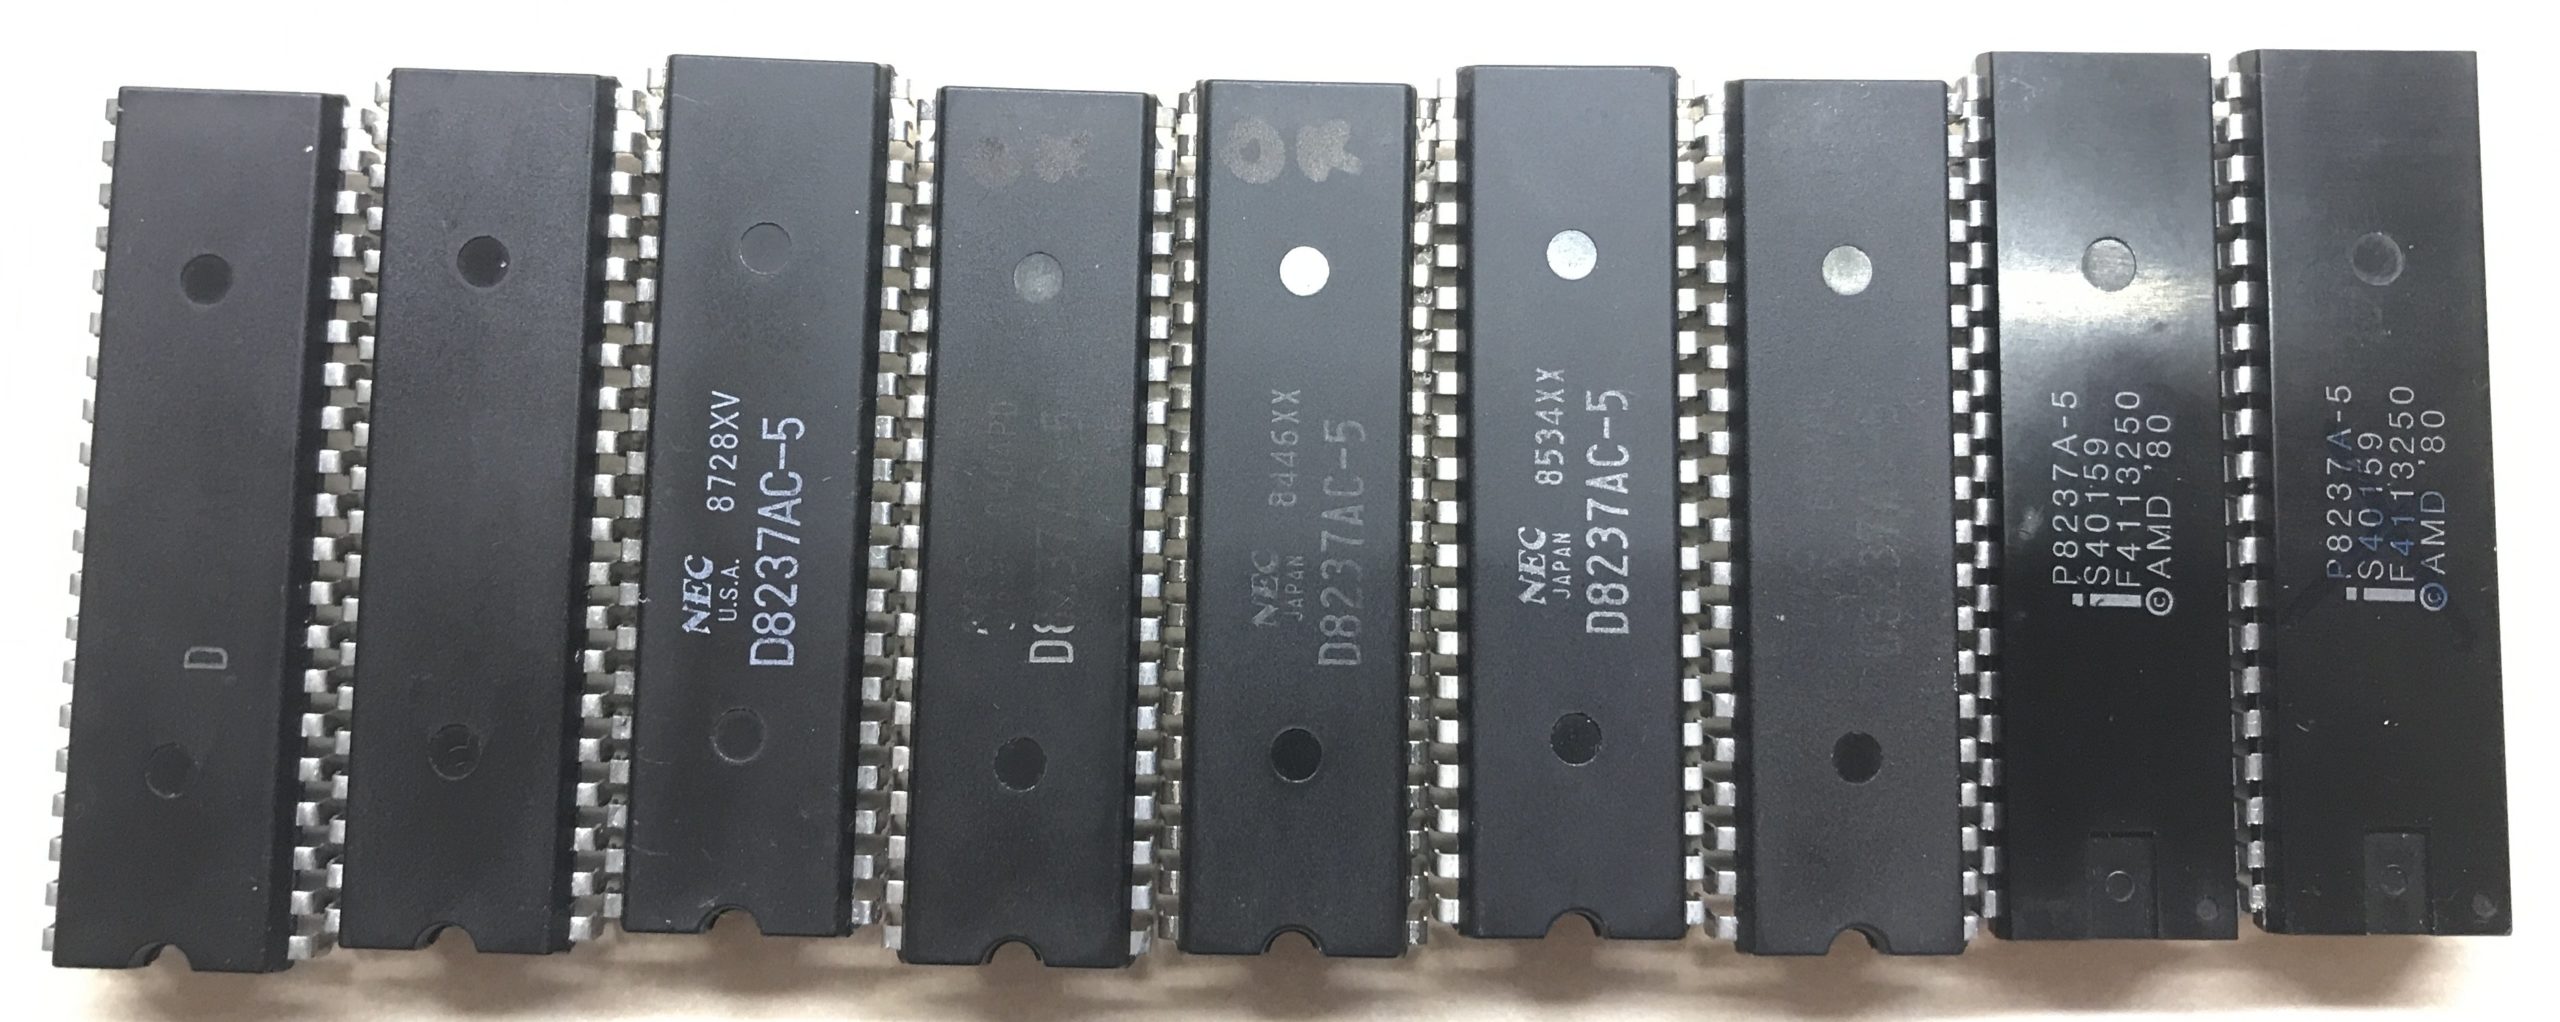 I have tested a range of recycled 8237 DMA controllers